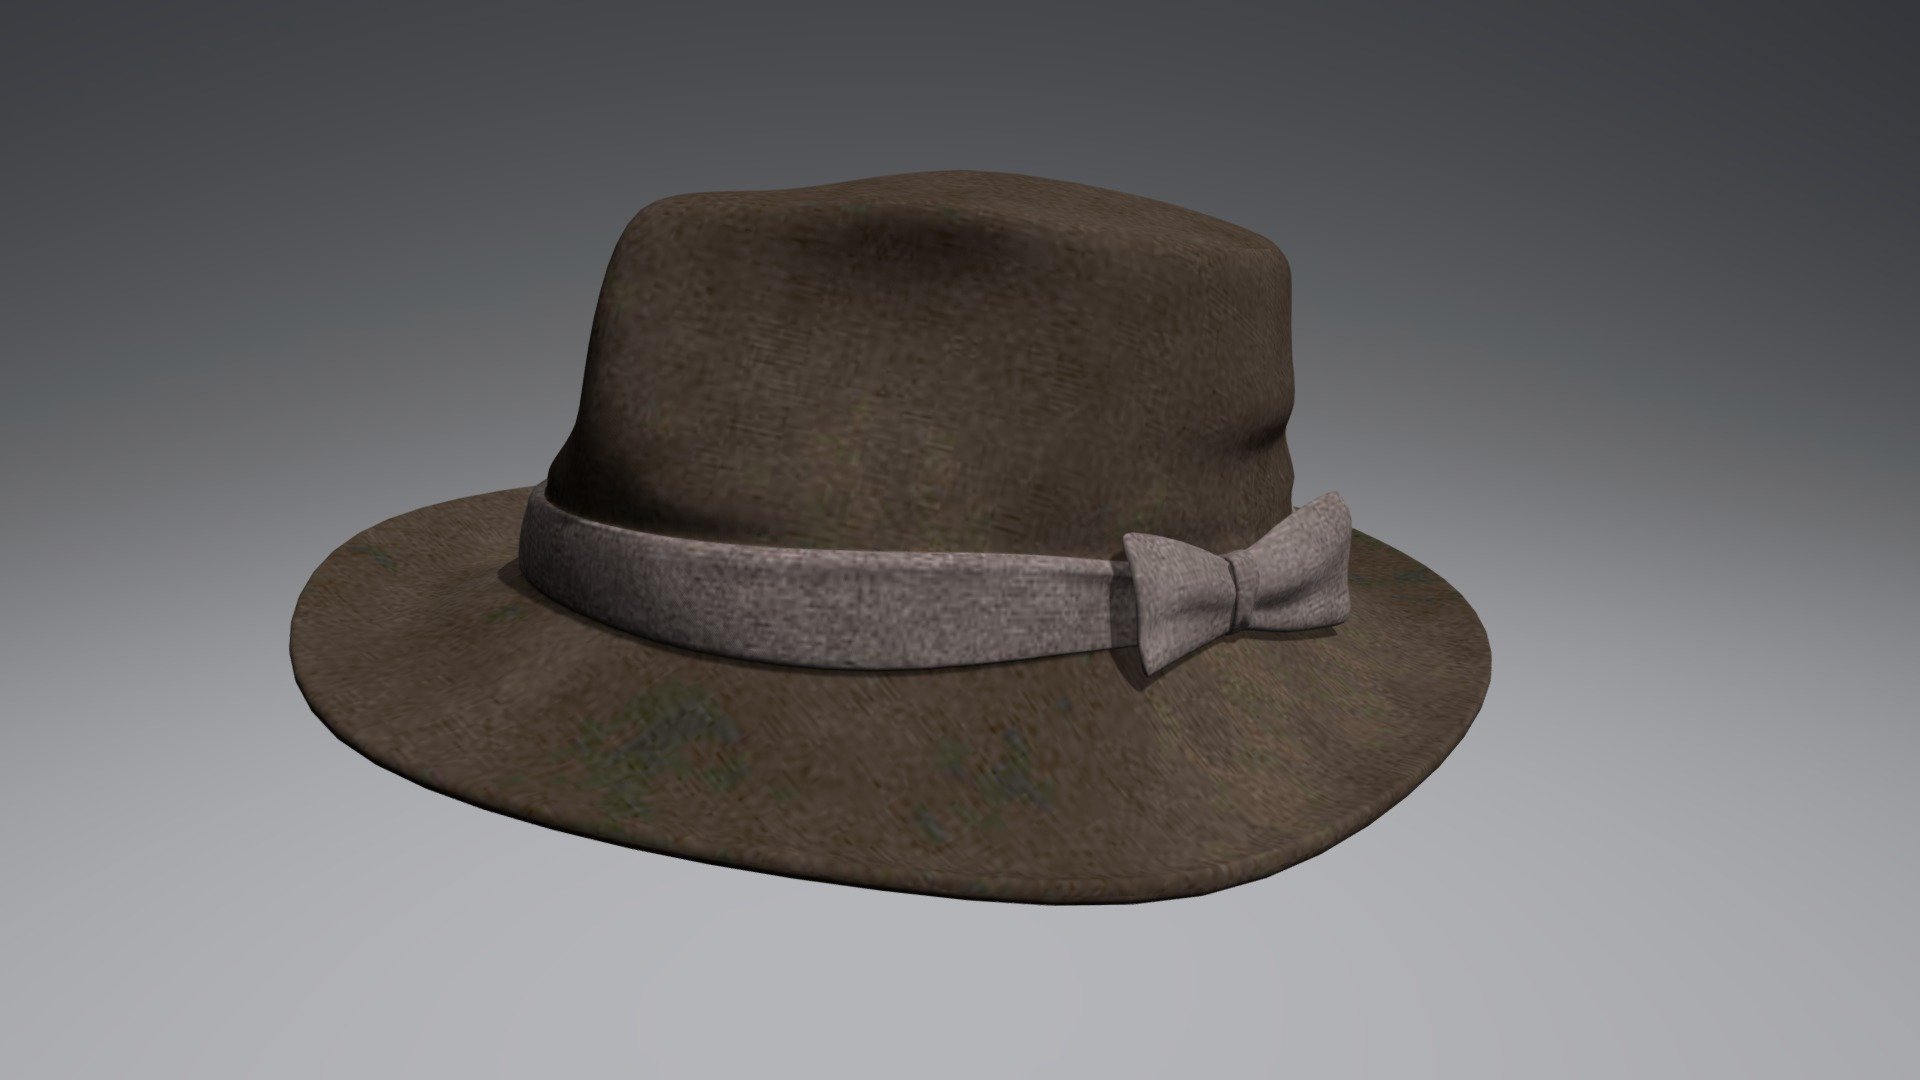 A pork pie hat is one of several different styles of hat that have been popular in one context or another since the mid-19th century, all of which bear superficial resemblance to a pork pie.

*1 model (medium poly) with textures and materials 3d model